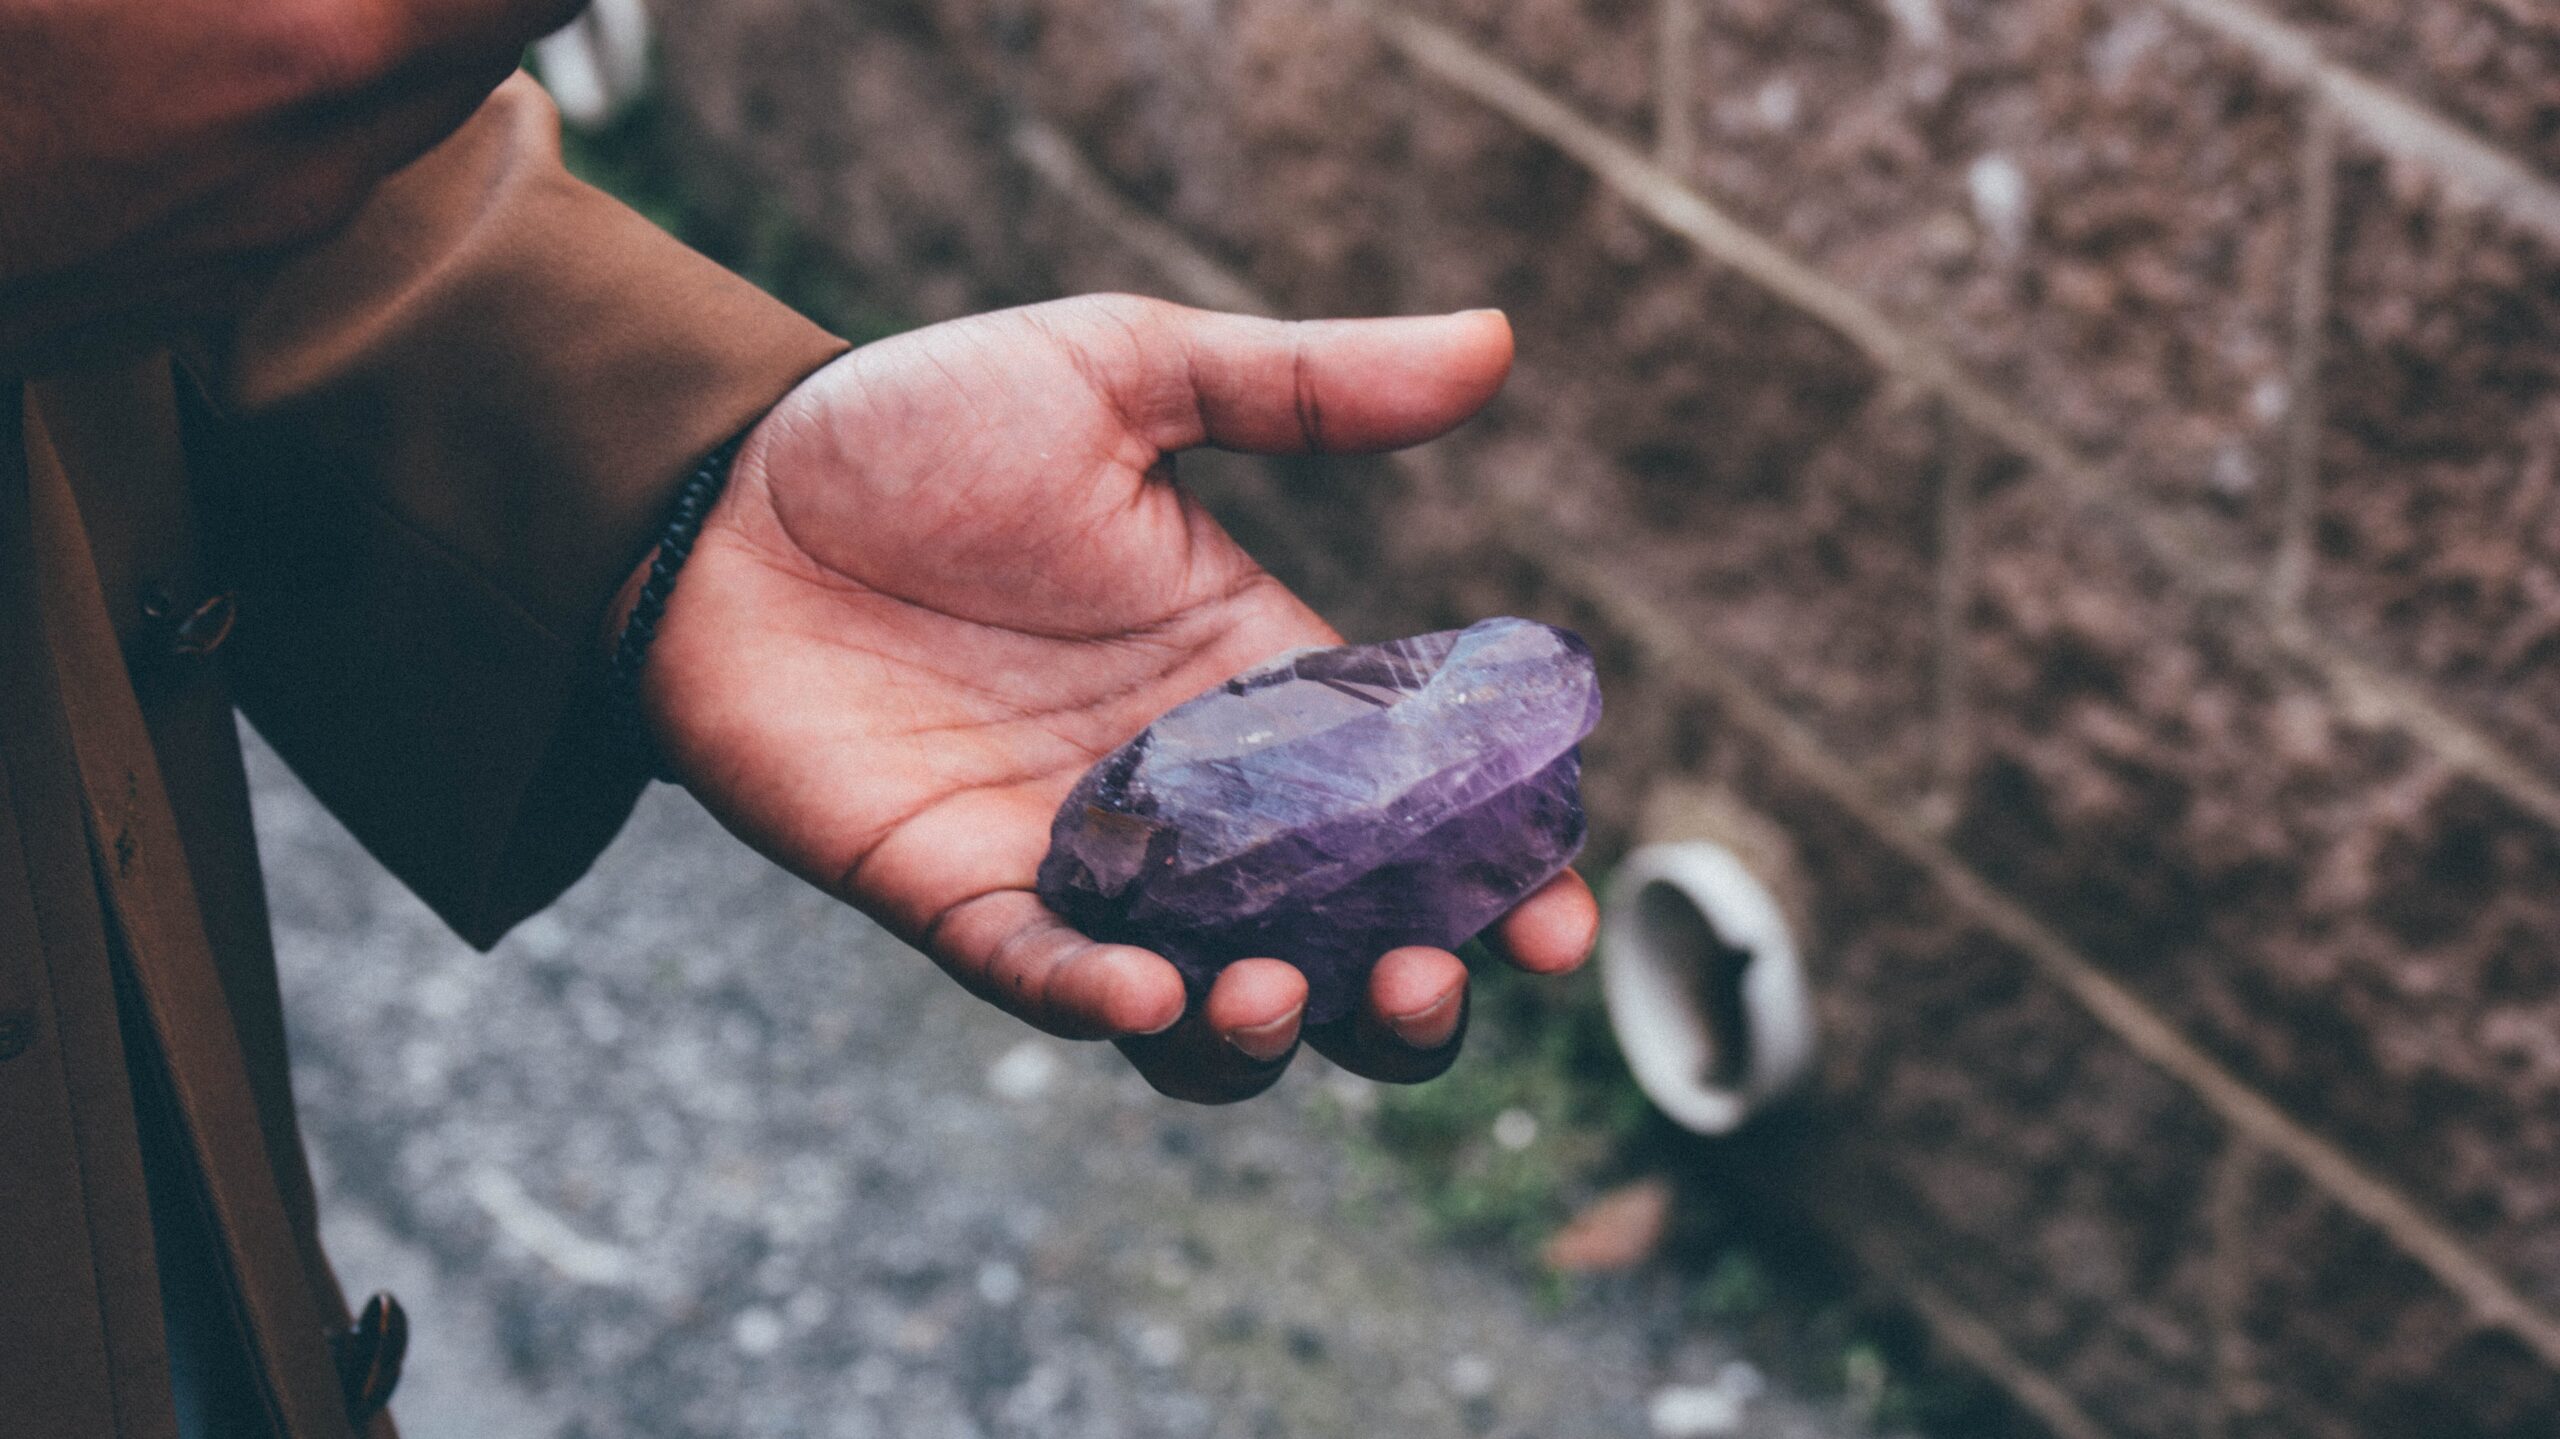 Person holding an amethyst stone